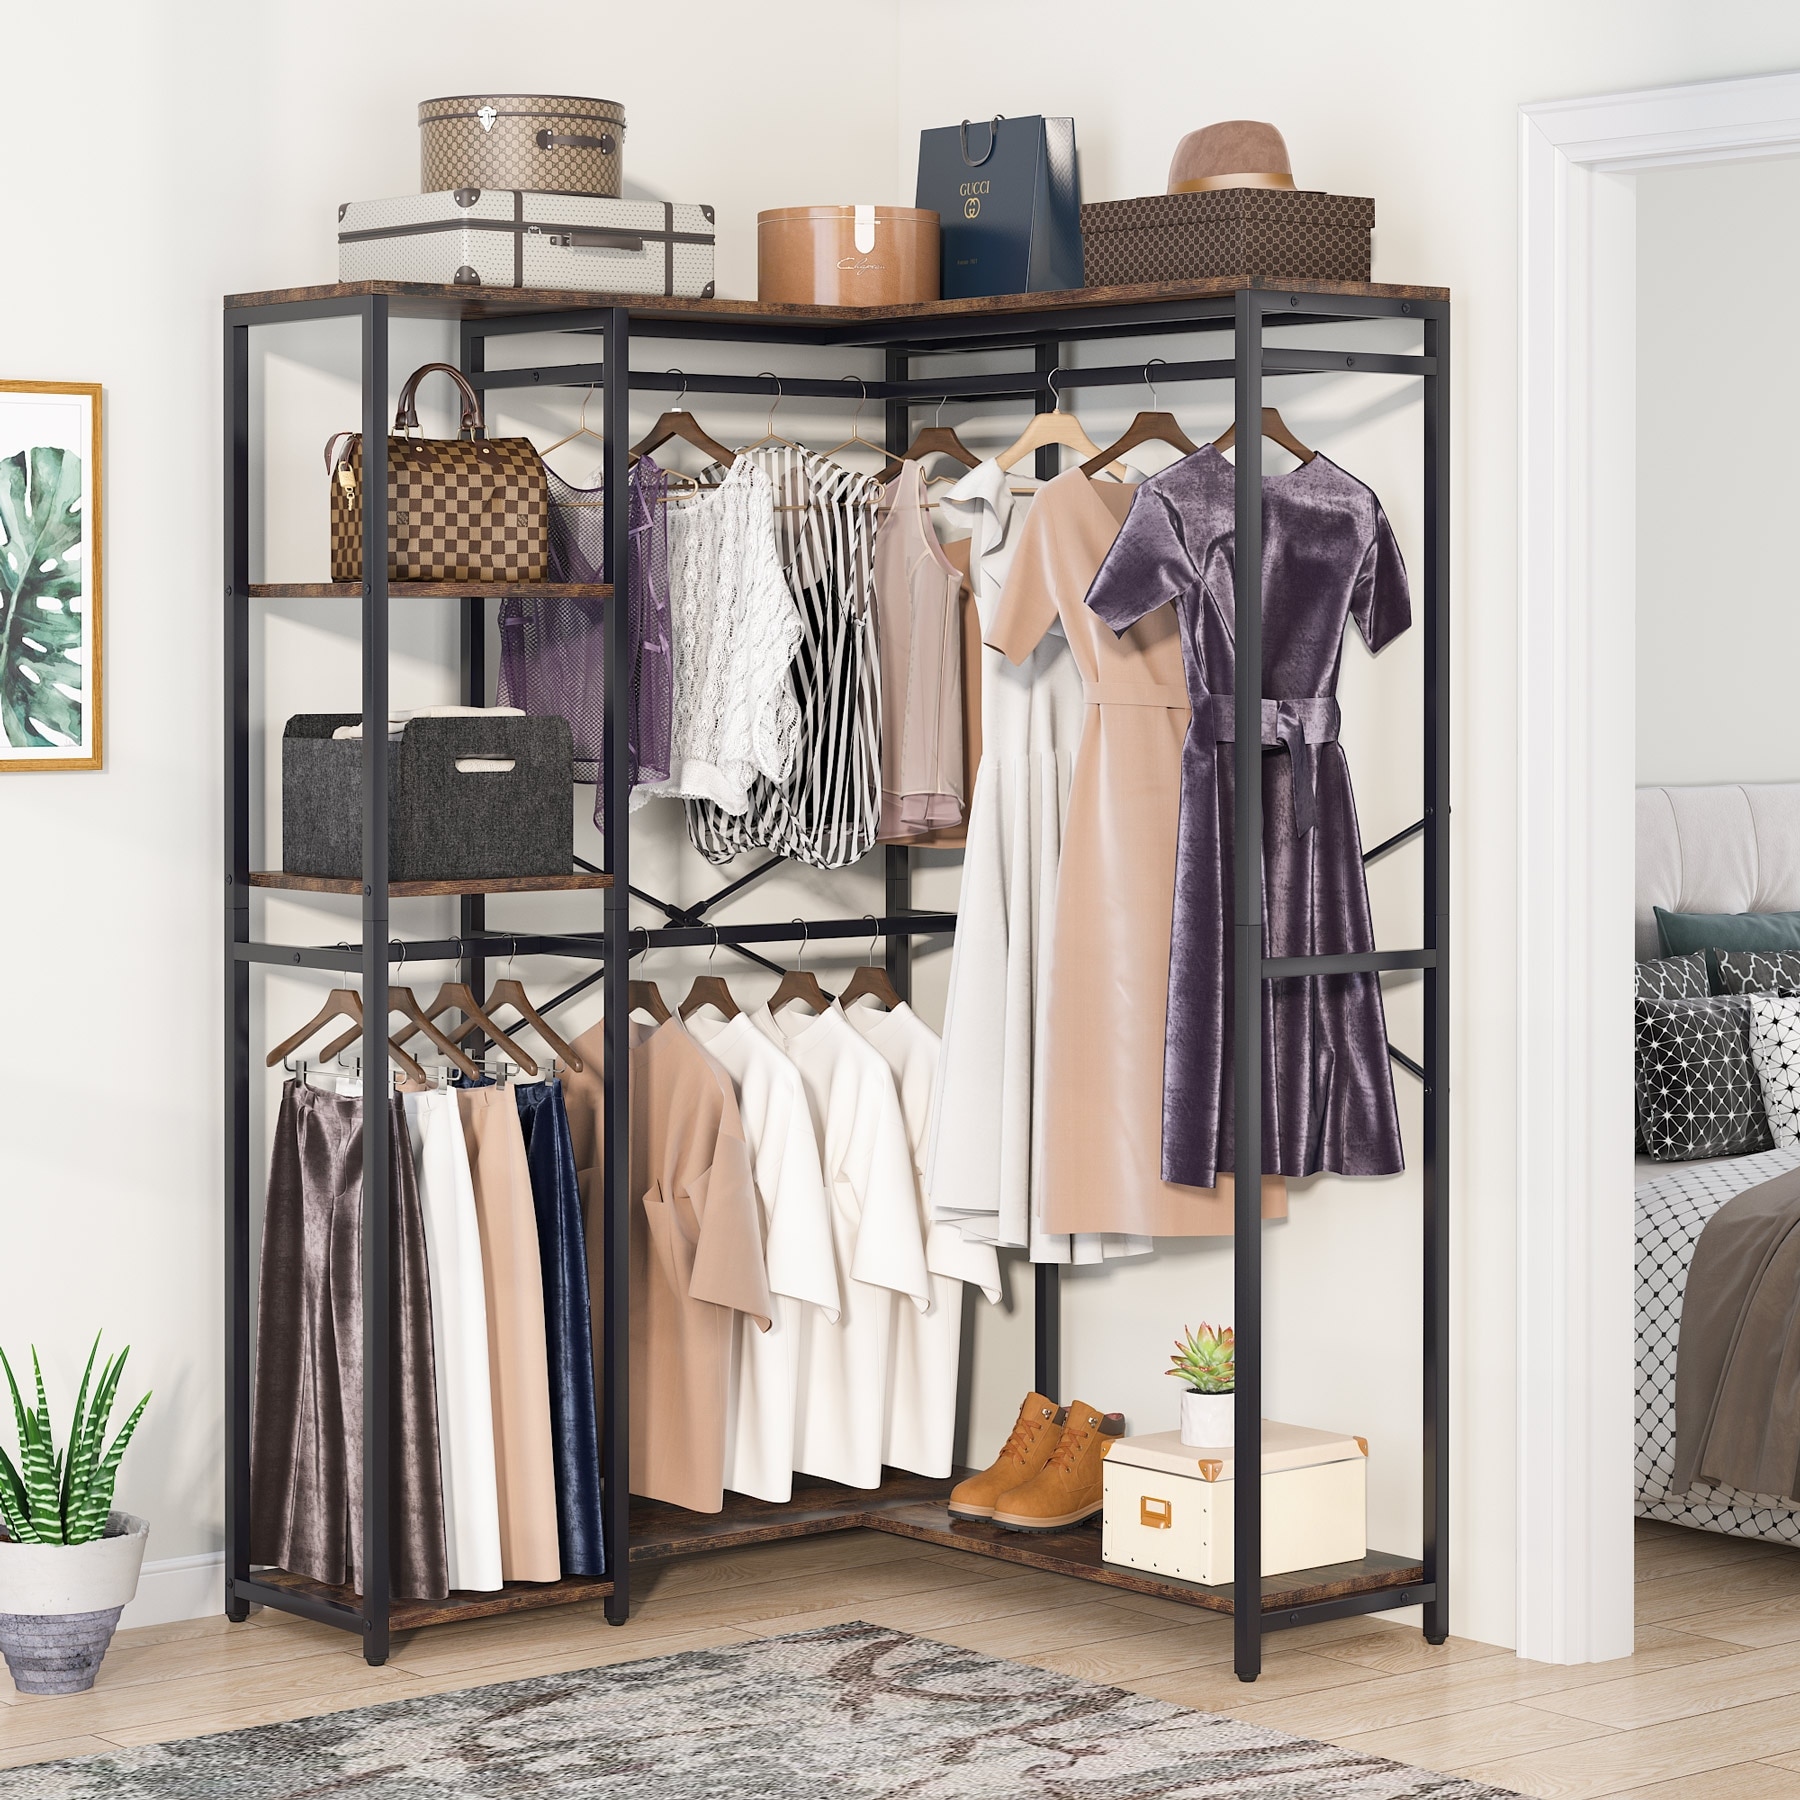 https://ak1.ostkcdn.com/images/products/is/images/direct/eb7446dbbae50a1abd9e1a4c85b388a153562d63/Freestanding-L-Shape-Closet-Organizer%2C47.24%22-W-Closet-Corner-System%2C-4-Tier-Clothing-Garment-Rack-with-4-Hanging-Rods.jpg